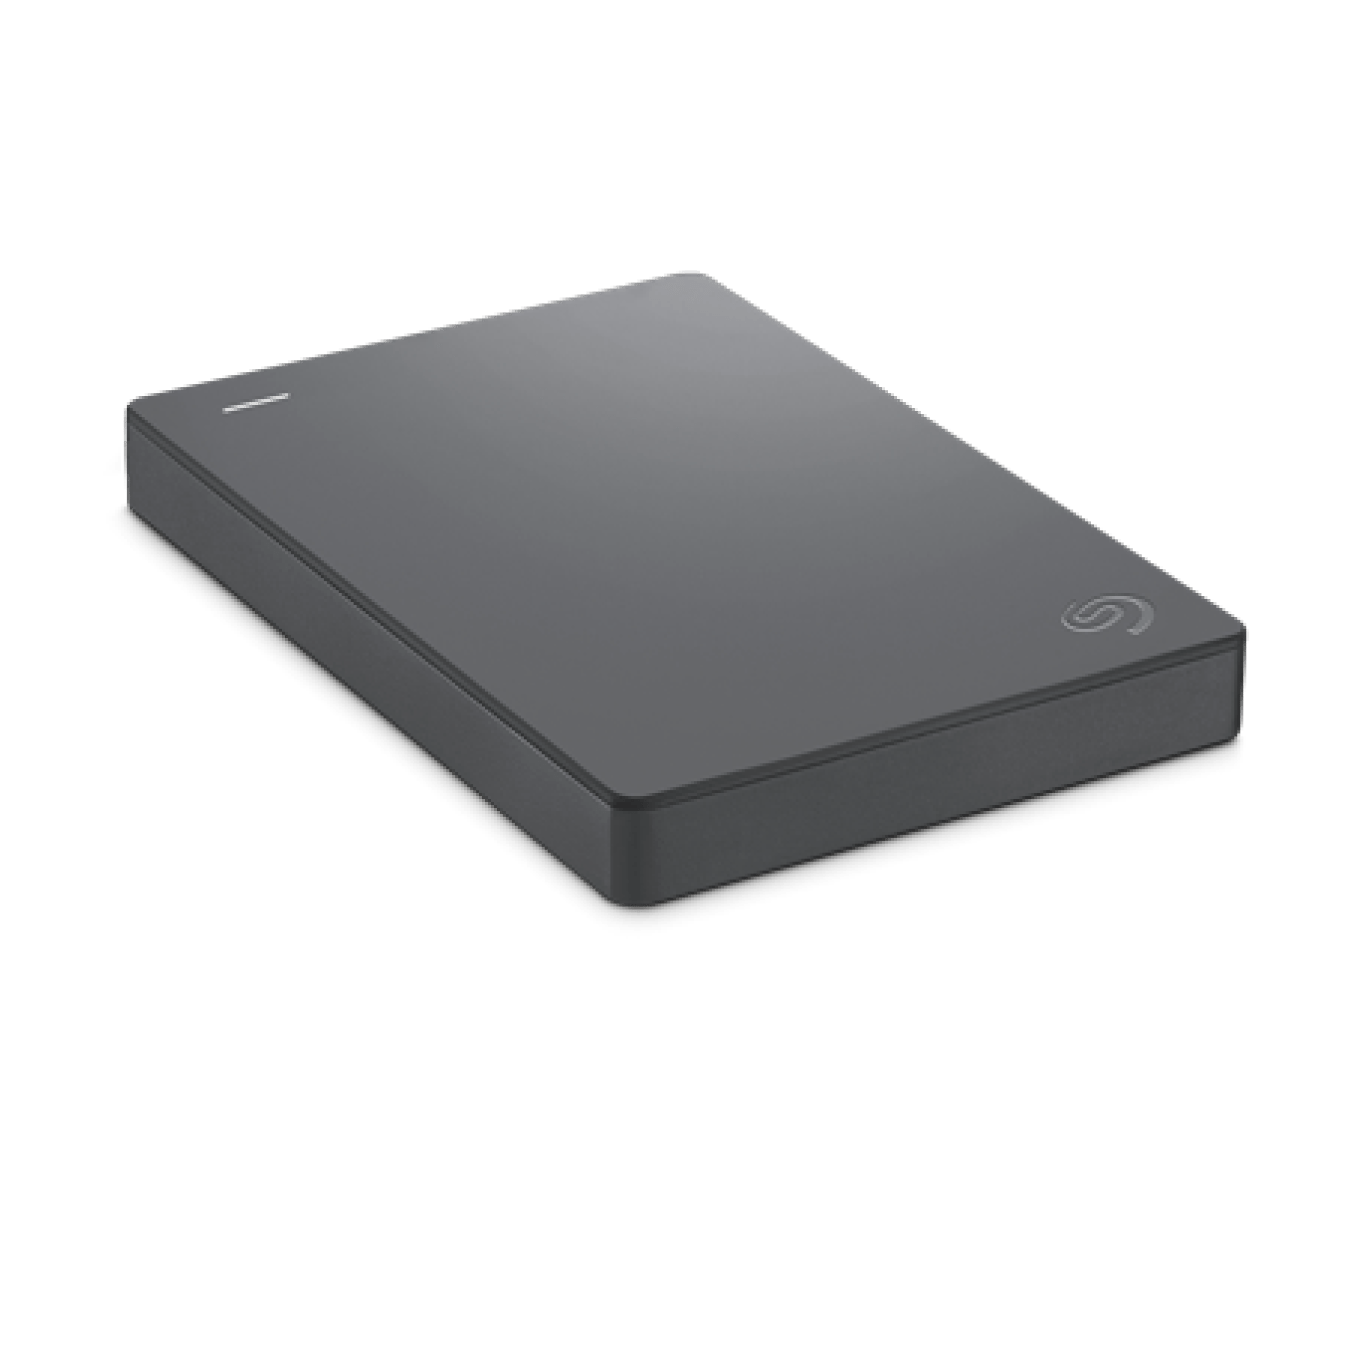 What Size External Hard Drive Do I Need?, HDD